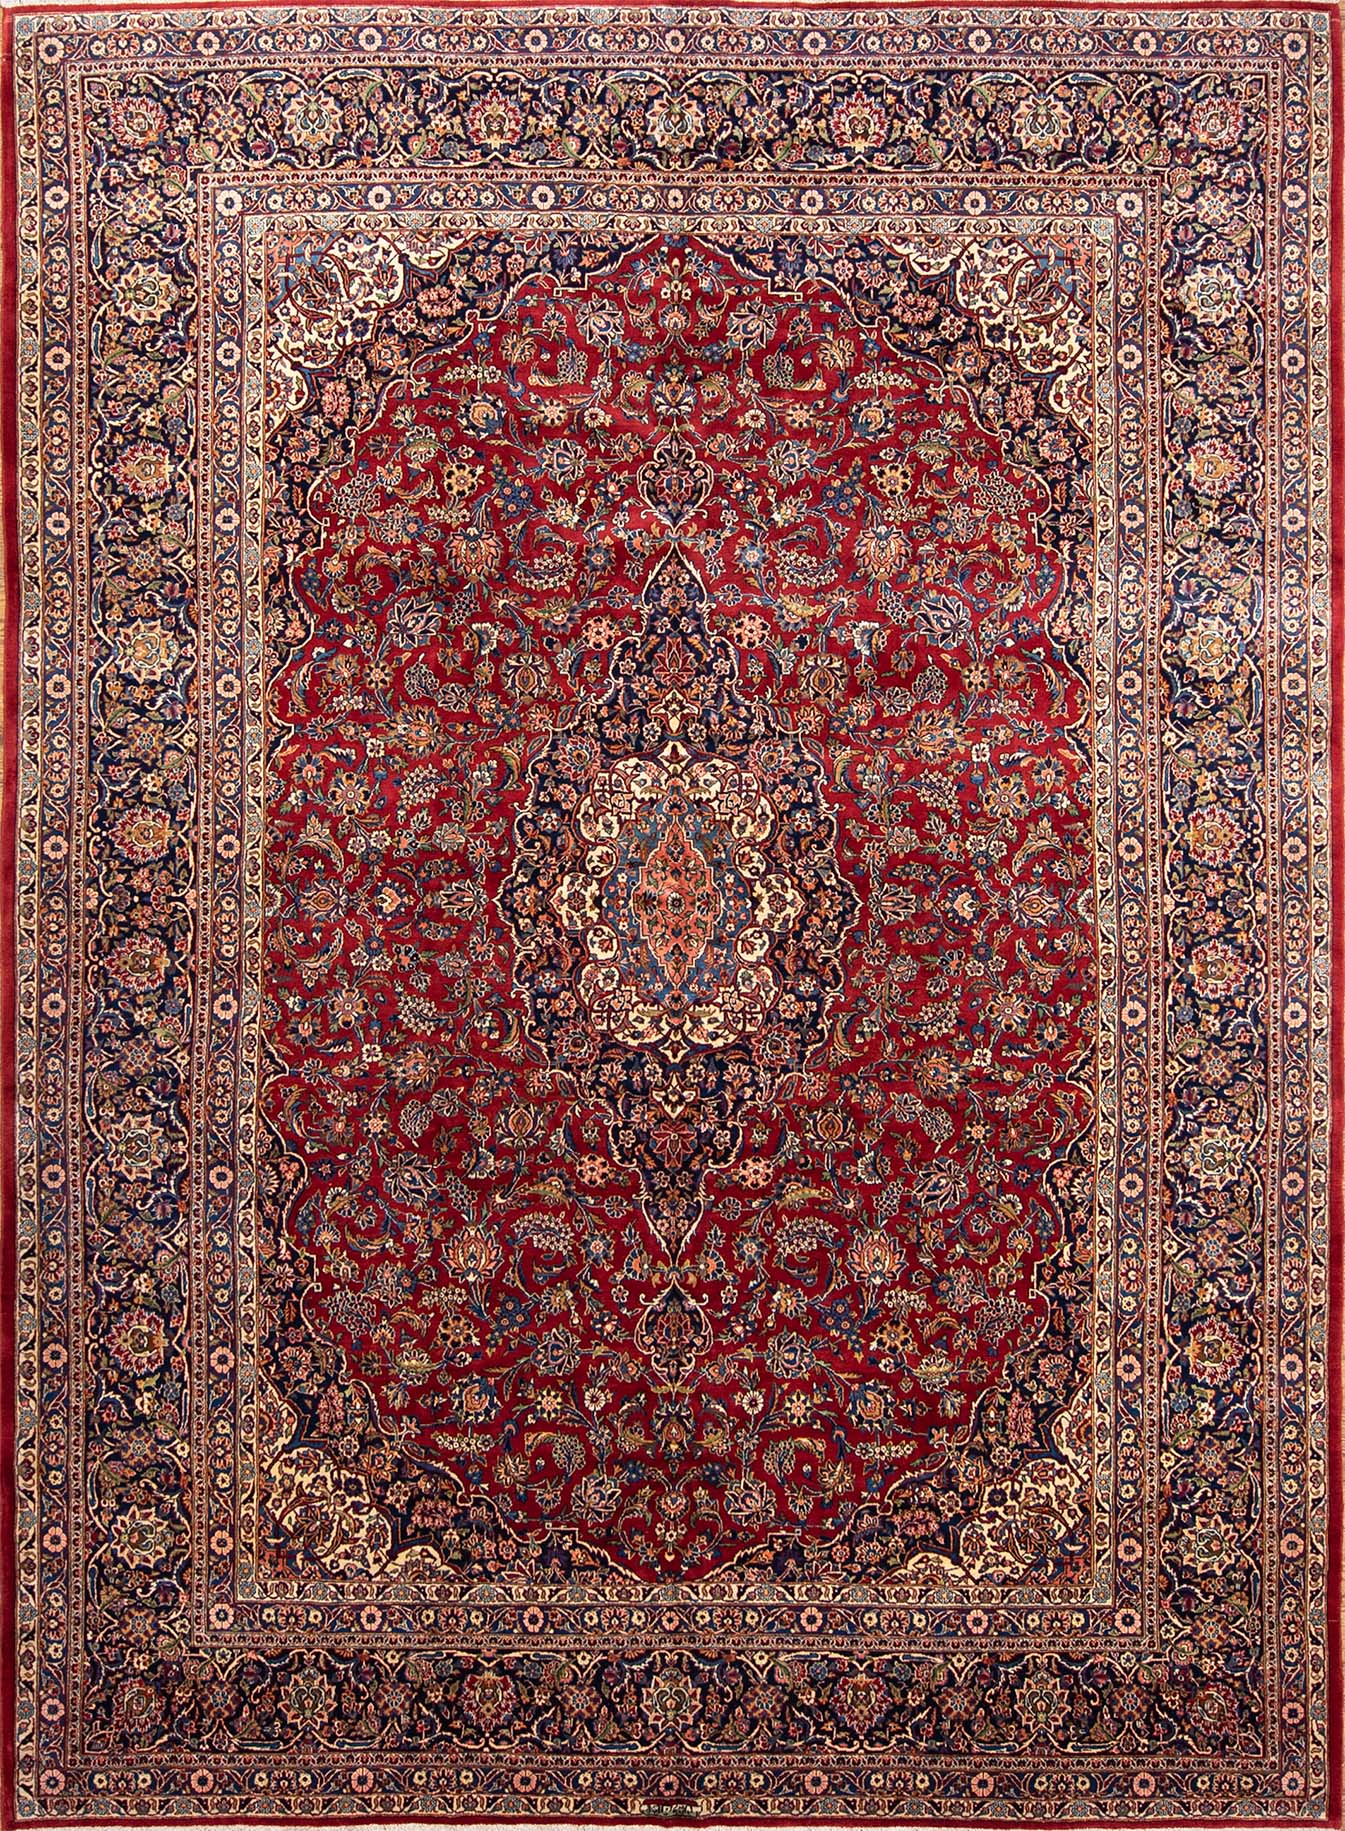 10x13 area rug. Handmade Persian Kashan wool rug for family room in red color.